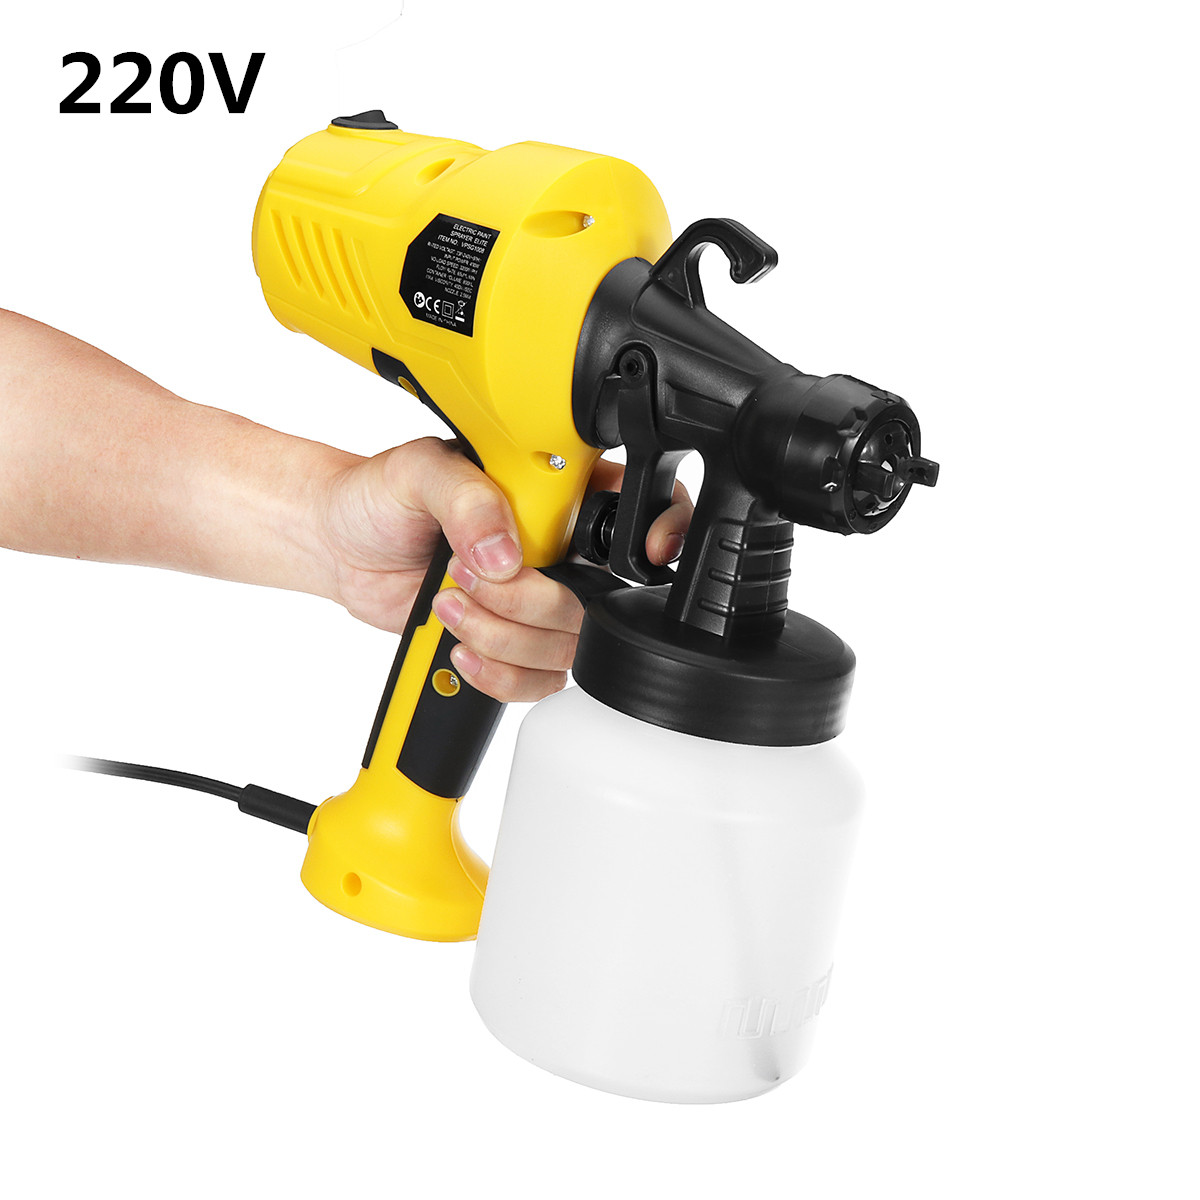 600W Electric Spray Paint Sprayer For Cars Wood Furniture Wall Woodworking 14